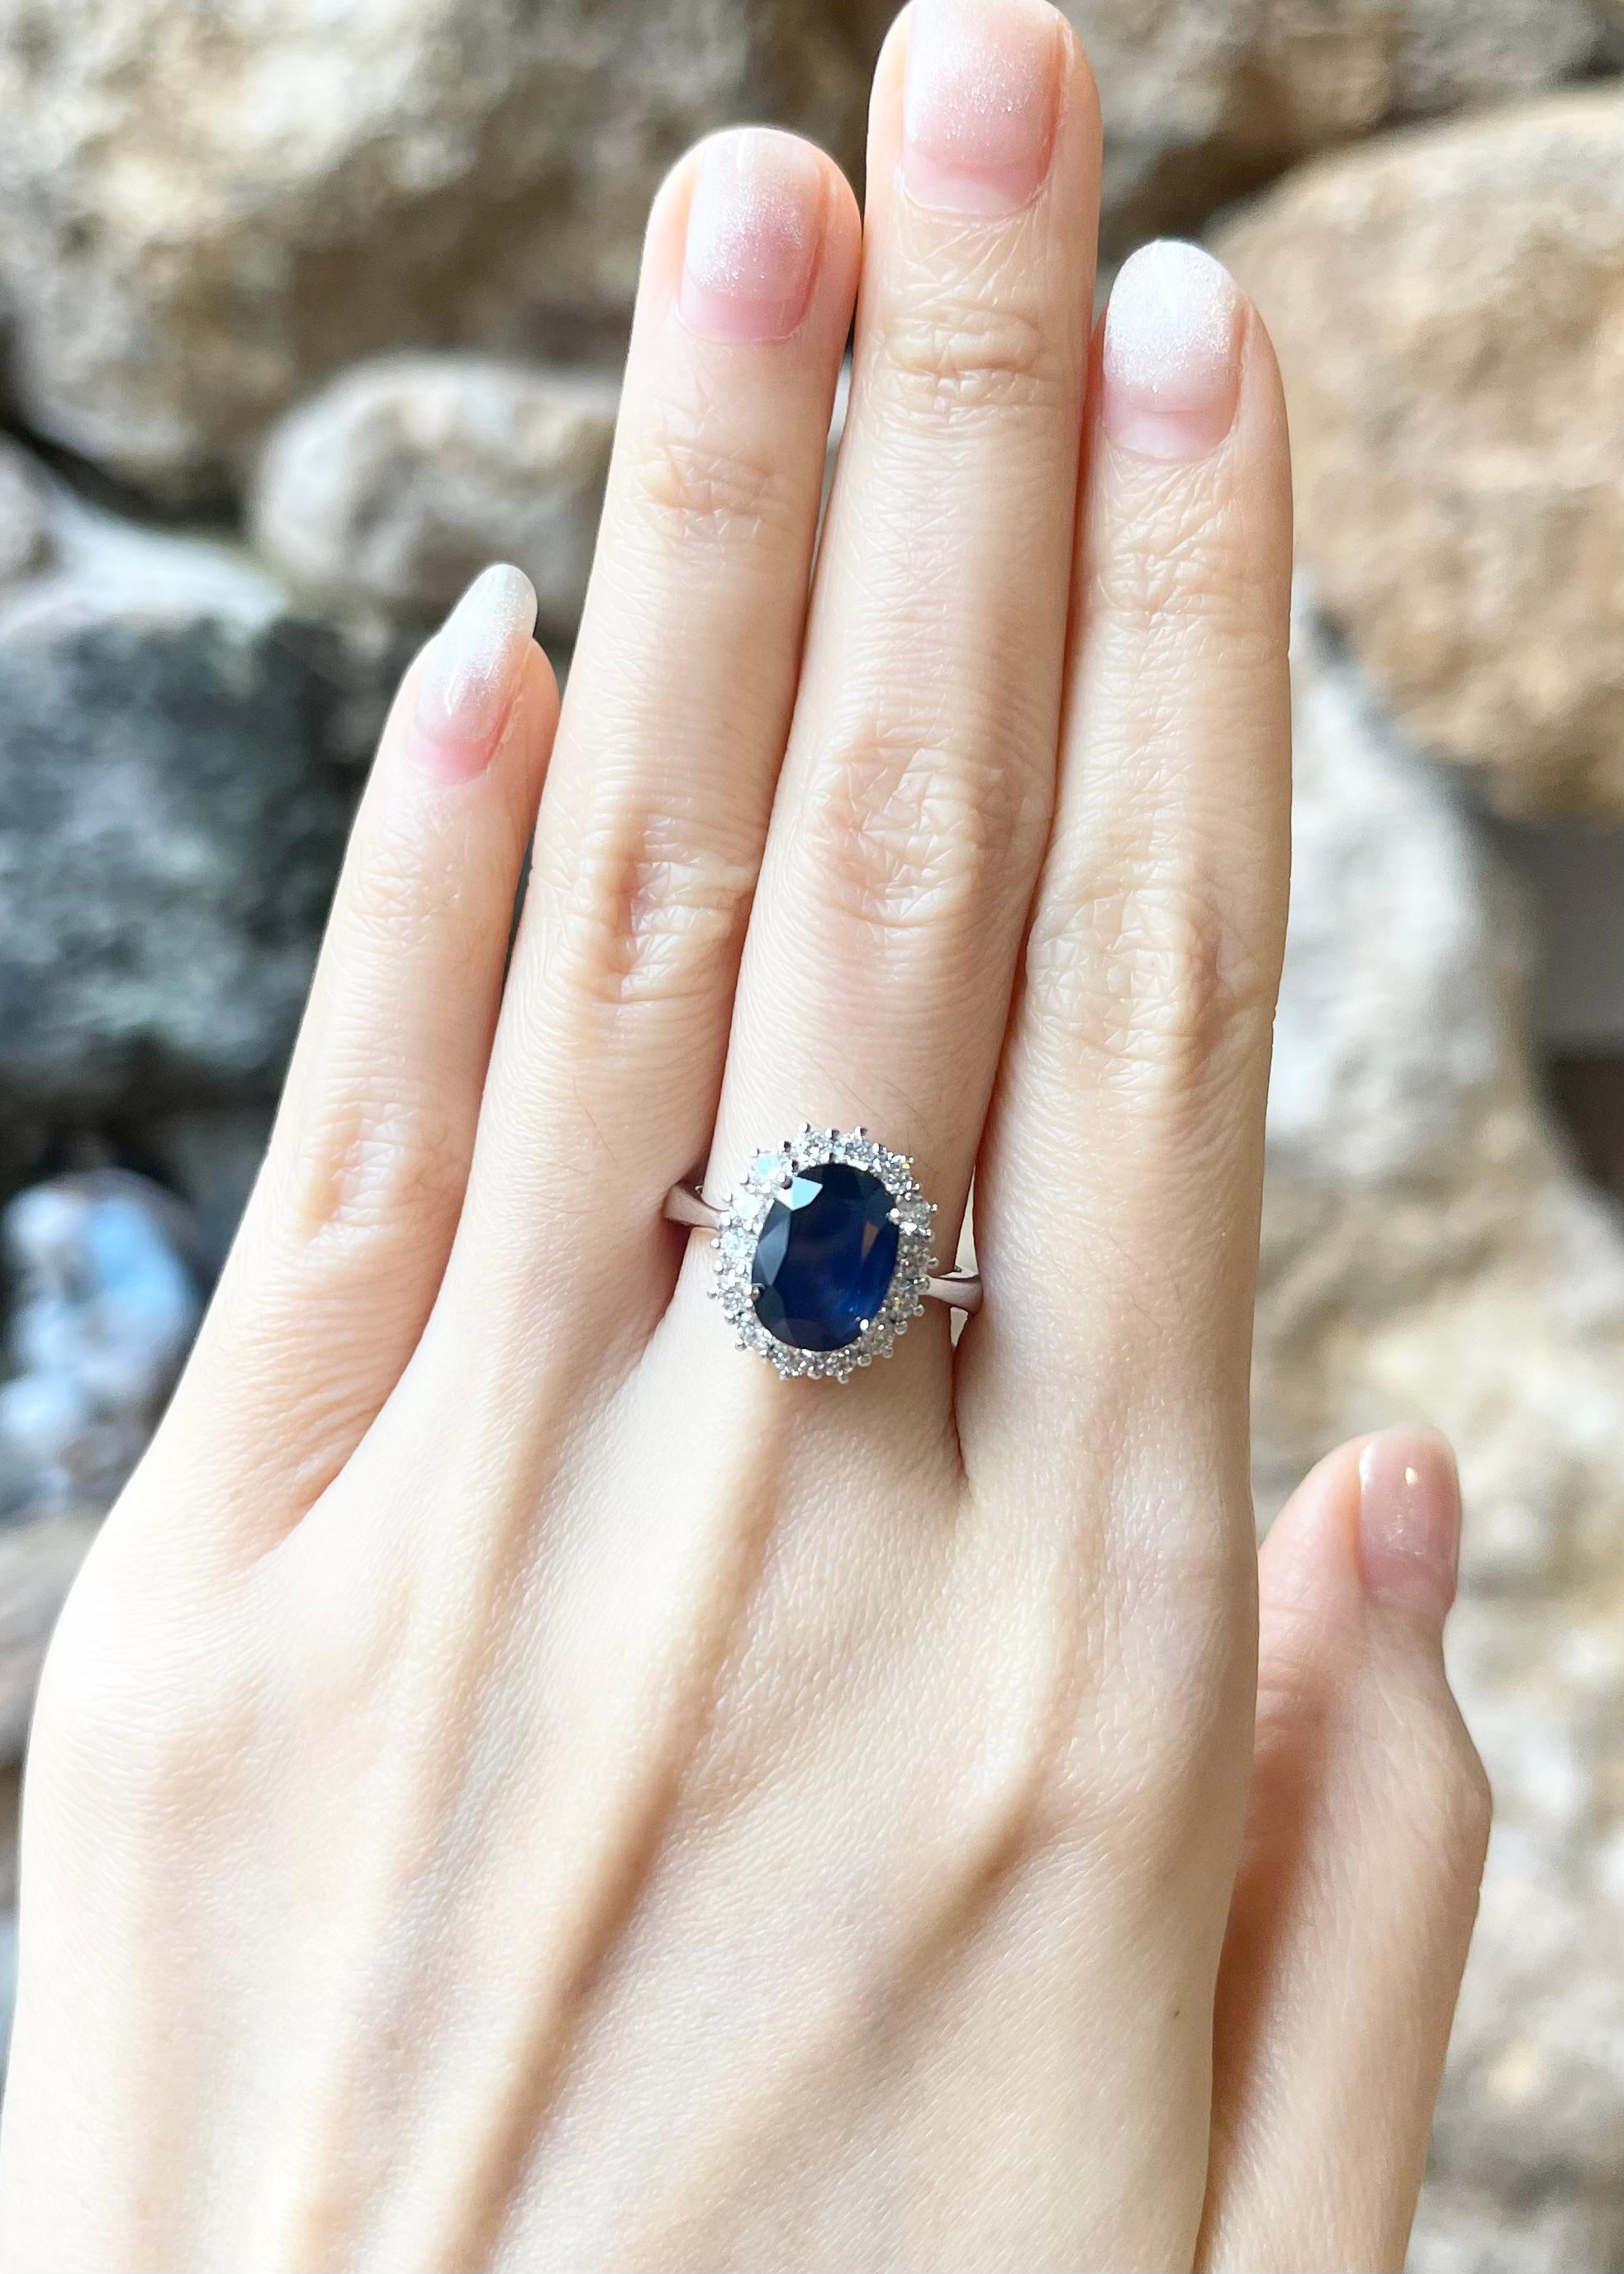 Blue Sapphire 3.22 carats with Diamond 0.71 carat Ring set in 18K White Gold Settings

Width:  1.2 cm 
Length: 1.4 cm
Ring Size: 53
Total Weight: 7.65 grams

